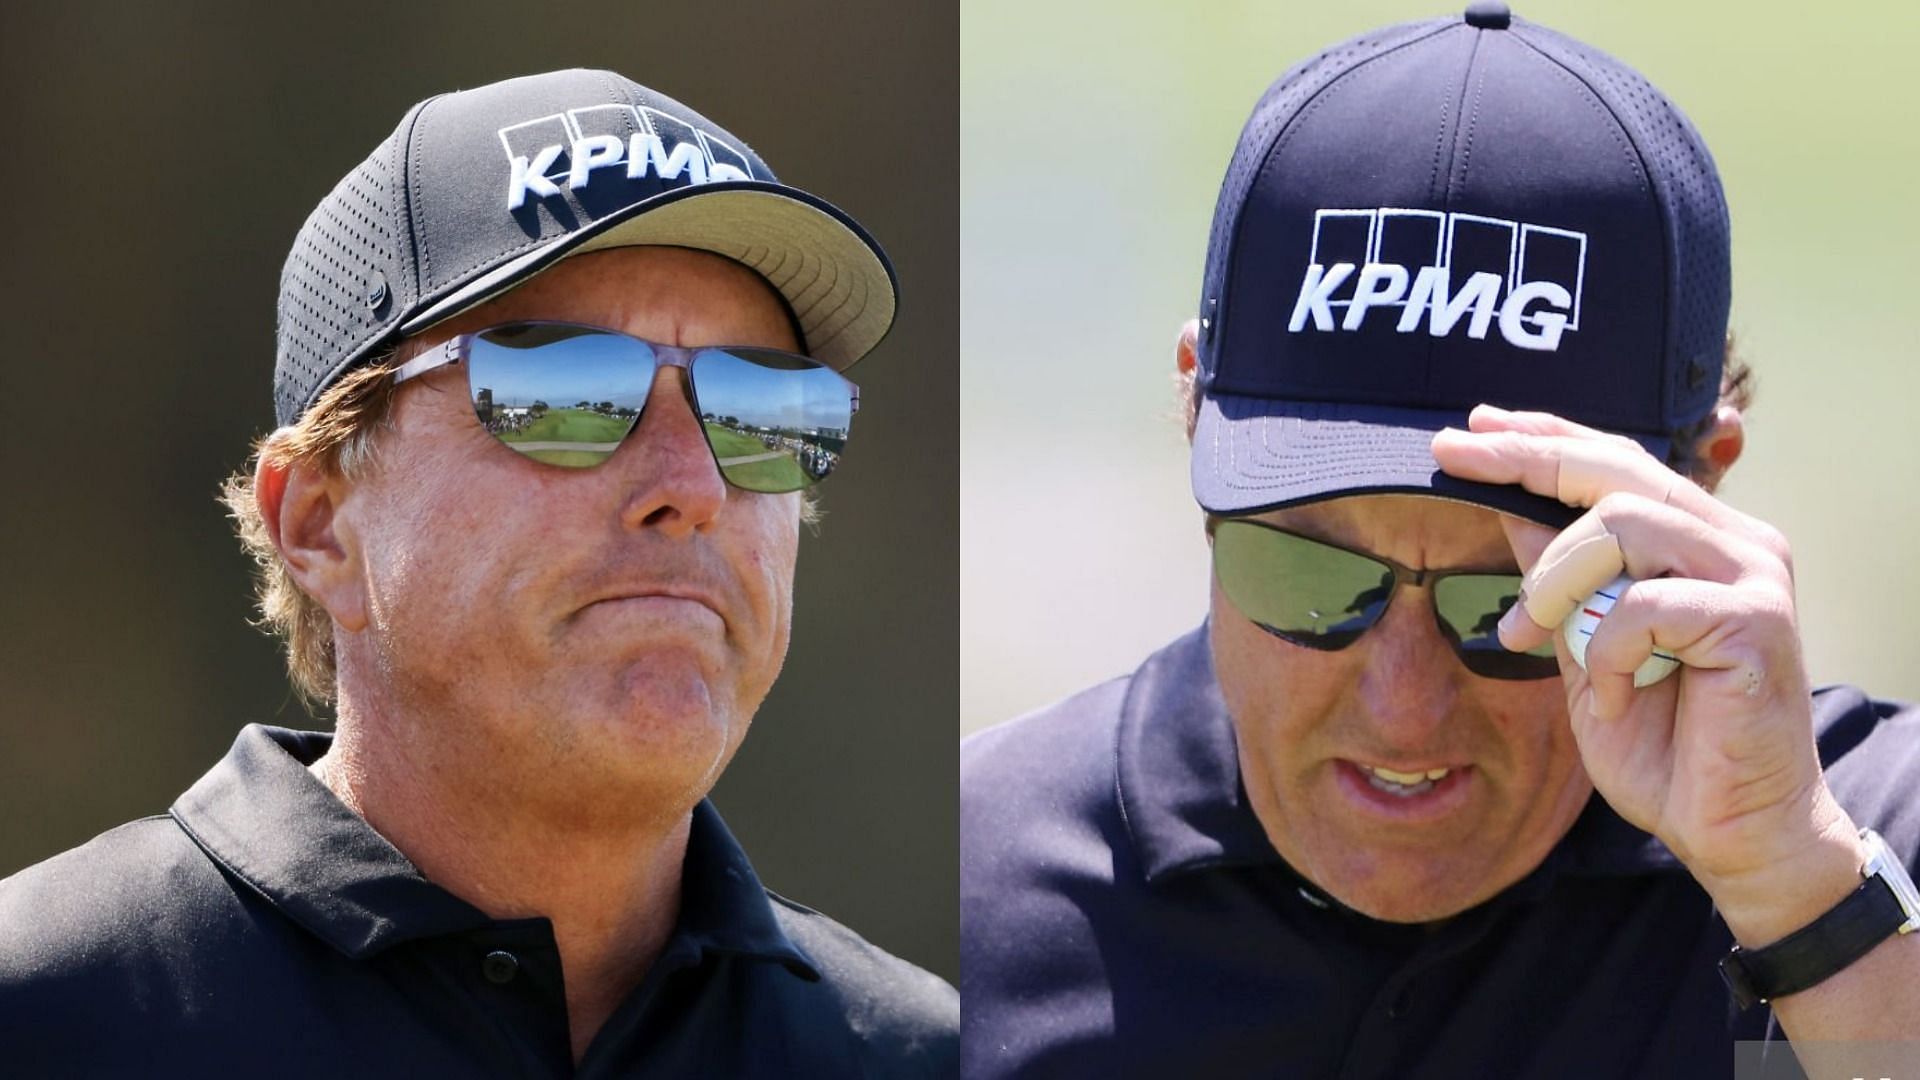 American golfer Phil Mickelson came under fire for comments on Saudi Arabia (Image via Sean M. Haffey/Getty Images)